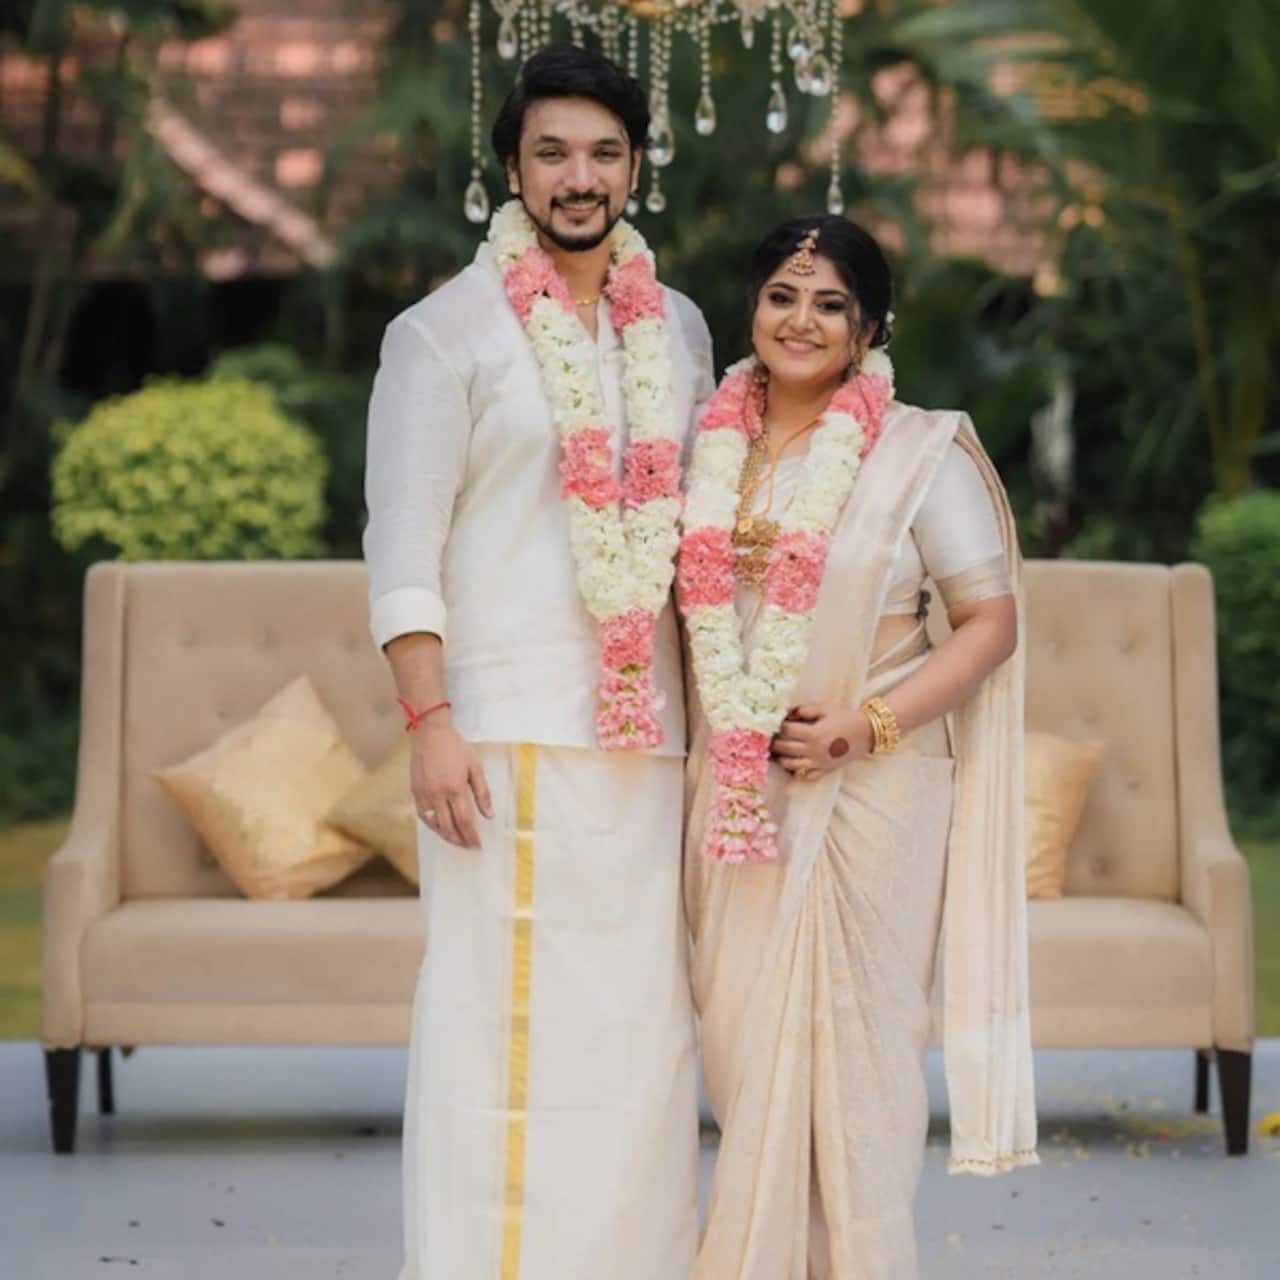 Manjima Mohan reacts to being fat-shamed by attendees at her wedding with Gautham Karthik